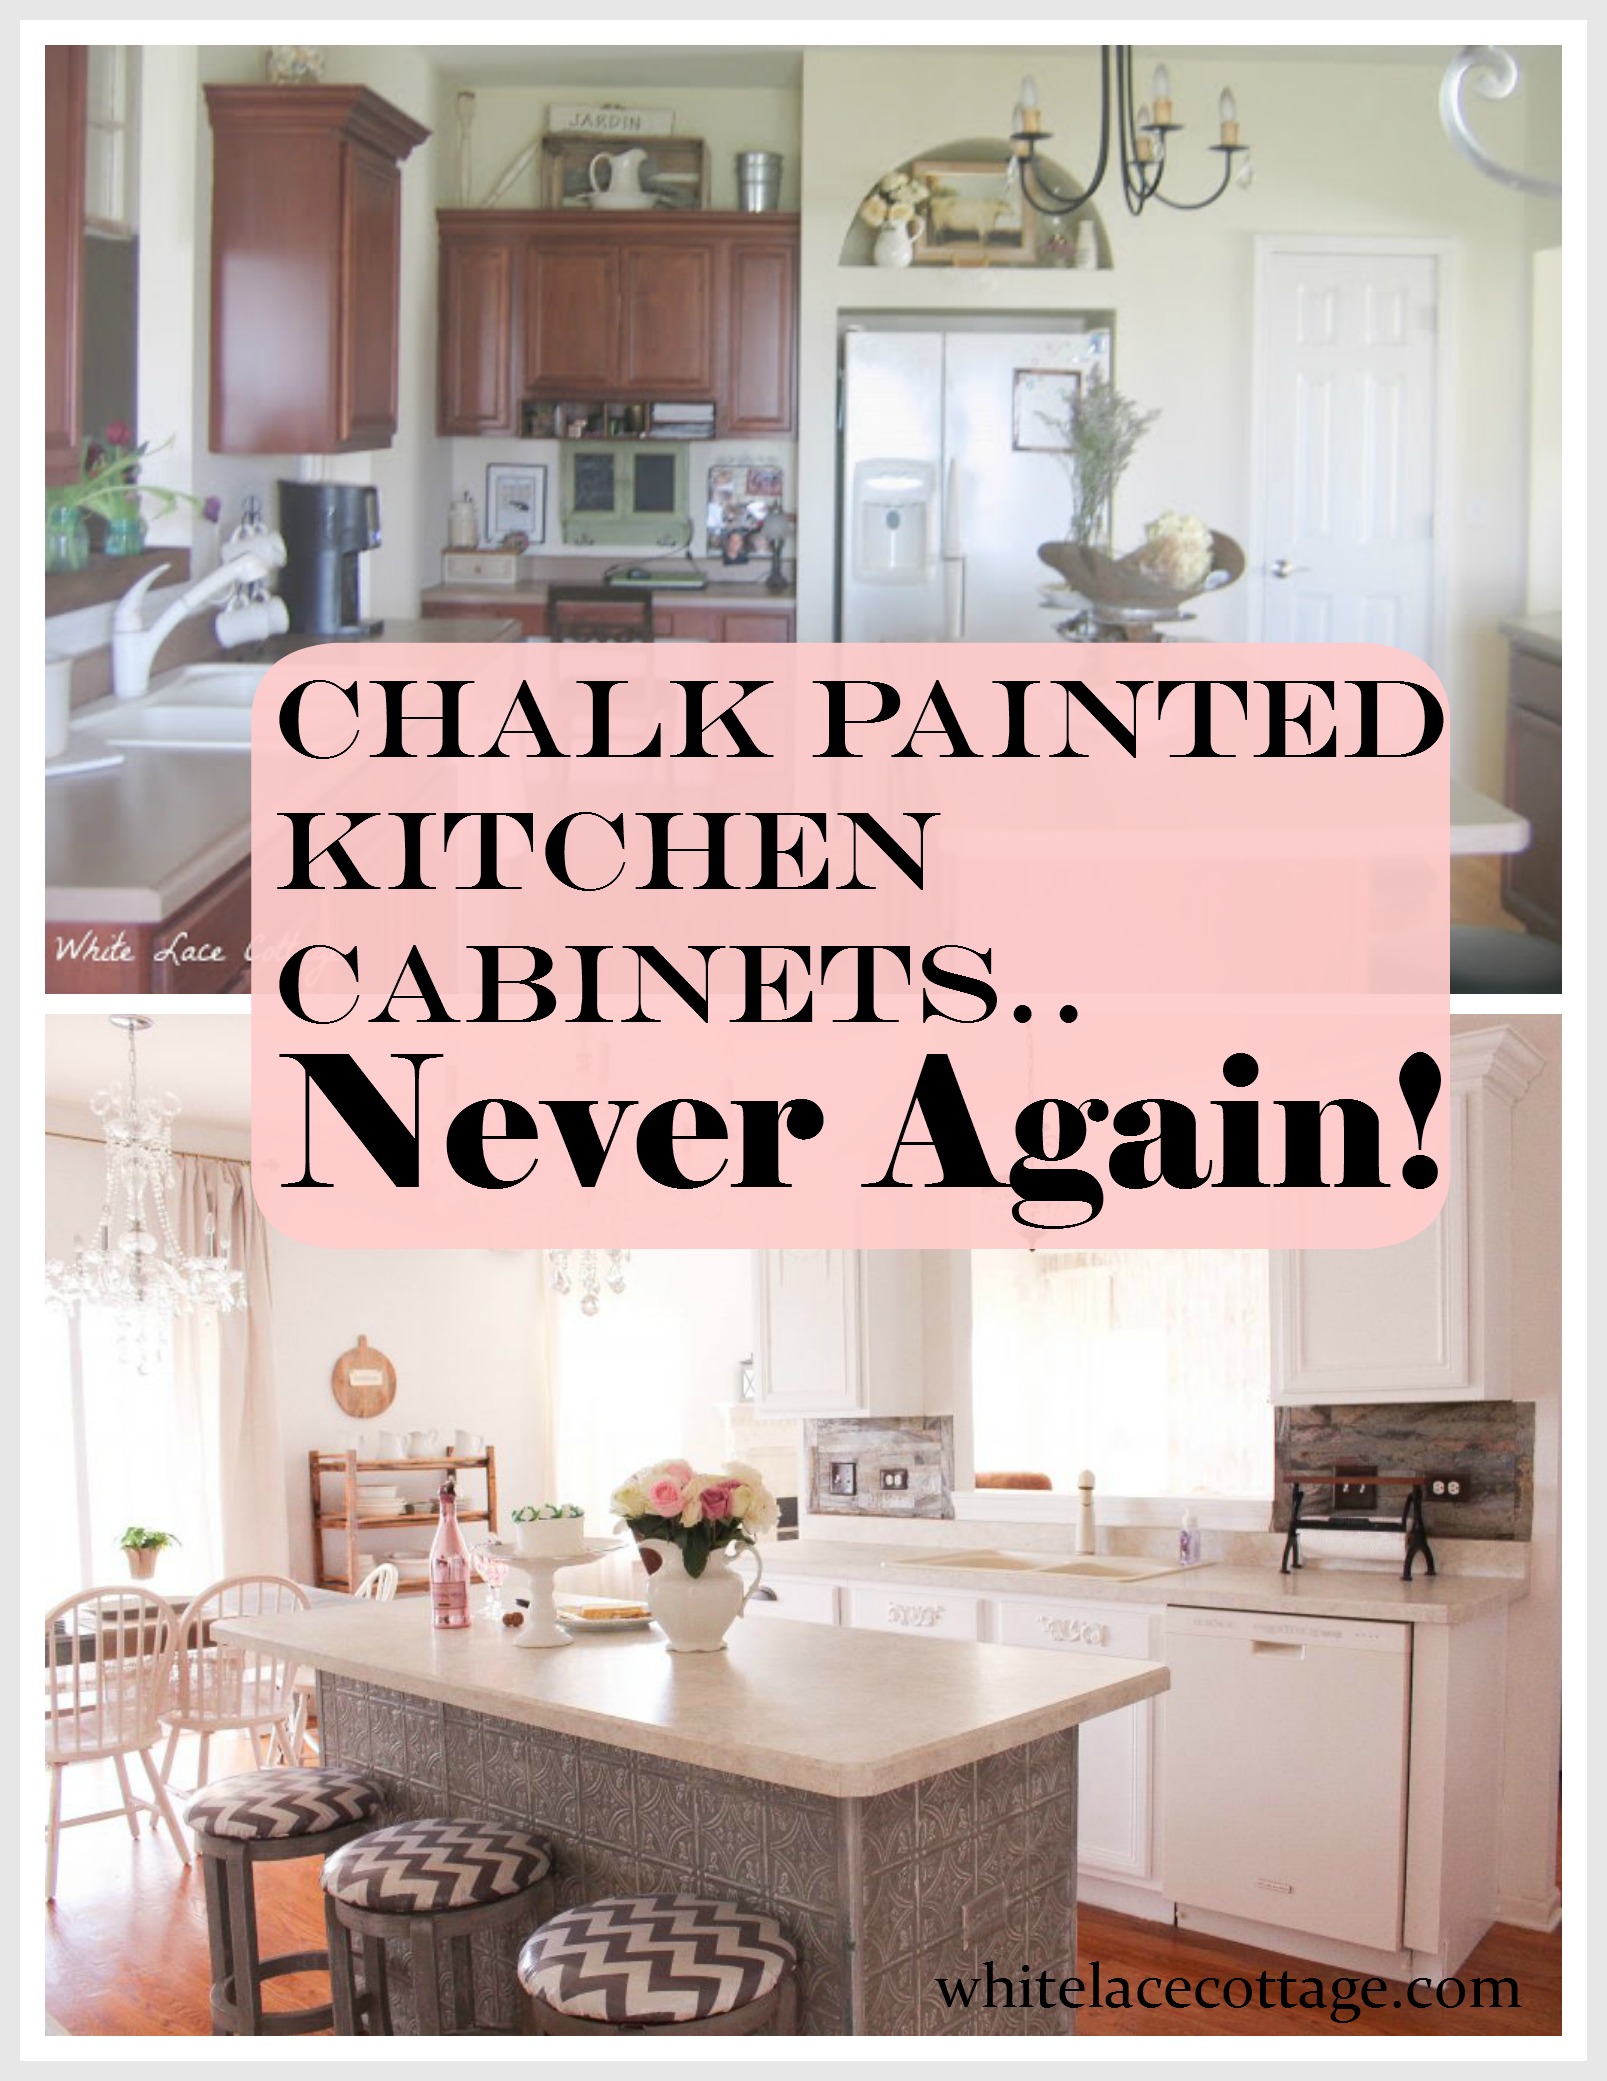 Chalk Painted Kitchen Cabinets Never Again Anne P Makeup And More,How To Stop Dog Barking When Left Alone Reddit